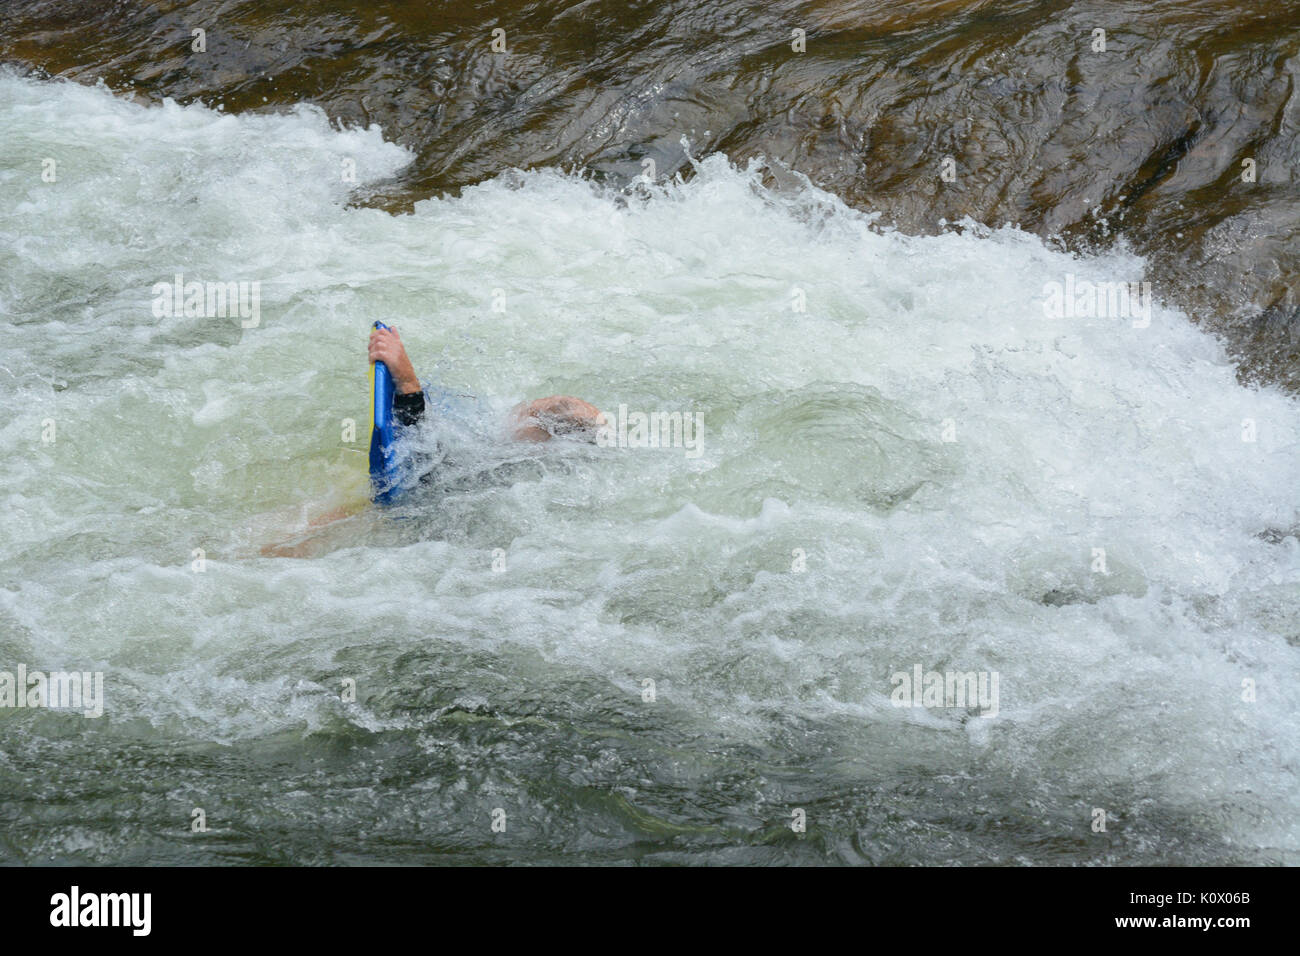 Rafting wipe out on white water rapid at Clear Creek White Water Park in Golden, Colorado Stock Photo